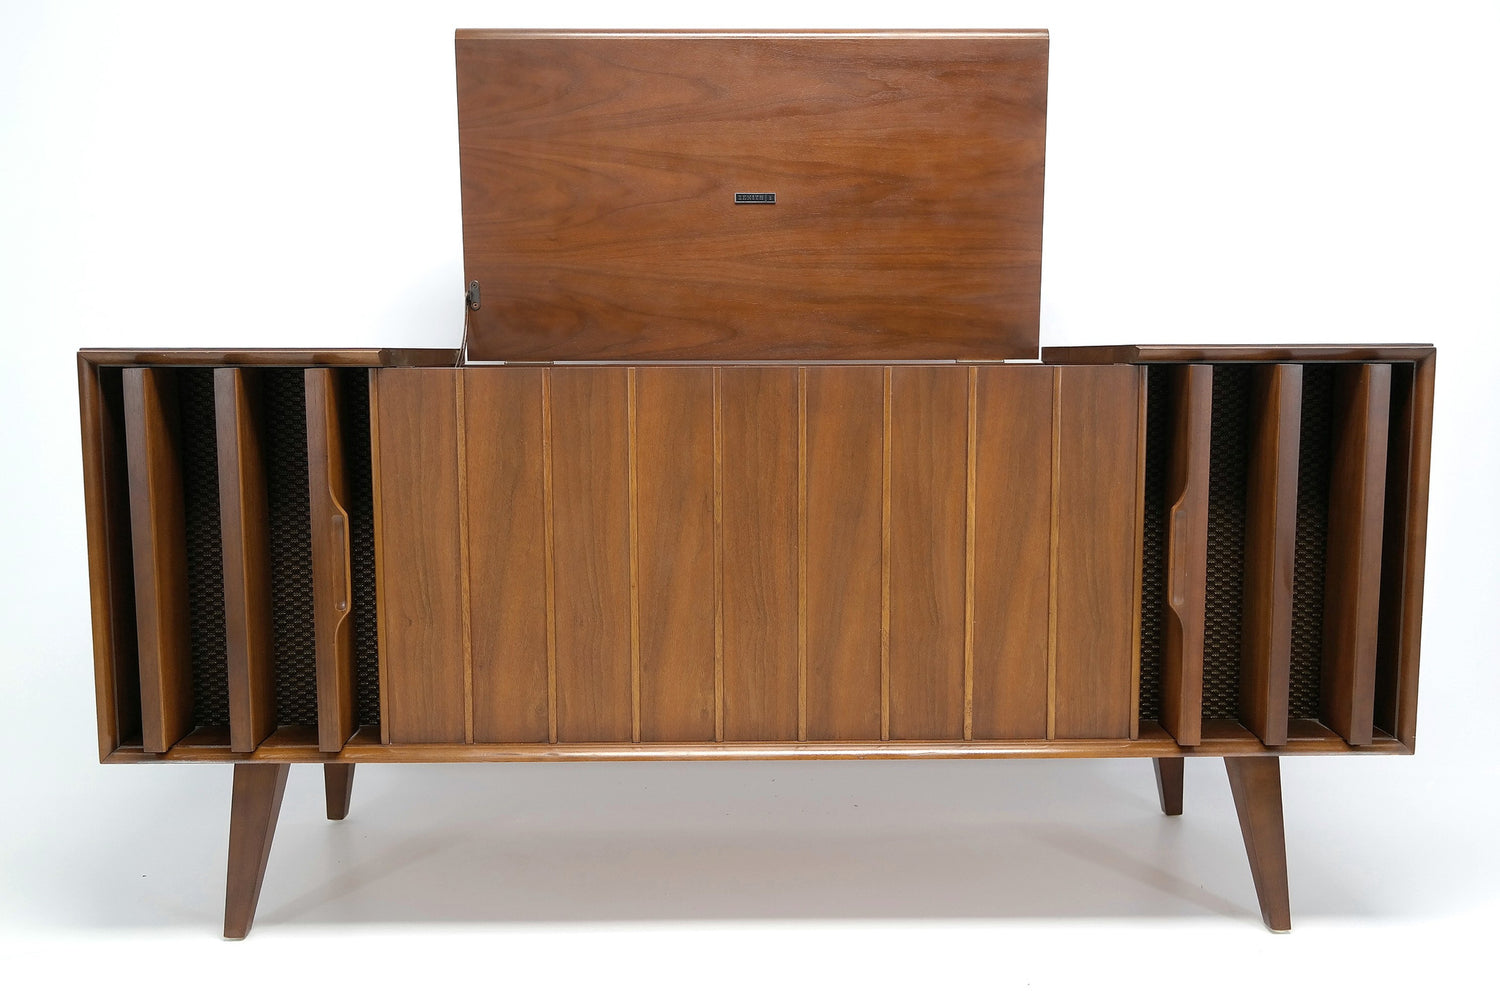 MCM STEREO - 60's - Mid Century Console Record Player - Bluetooth iPod iPhone Android Input AM/FM Tuner The Vintedge Co.